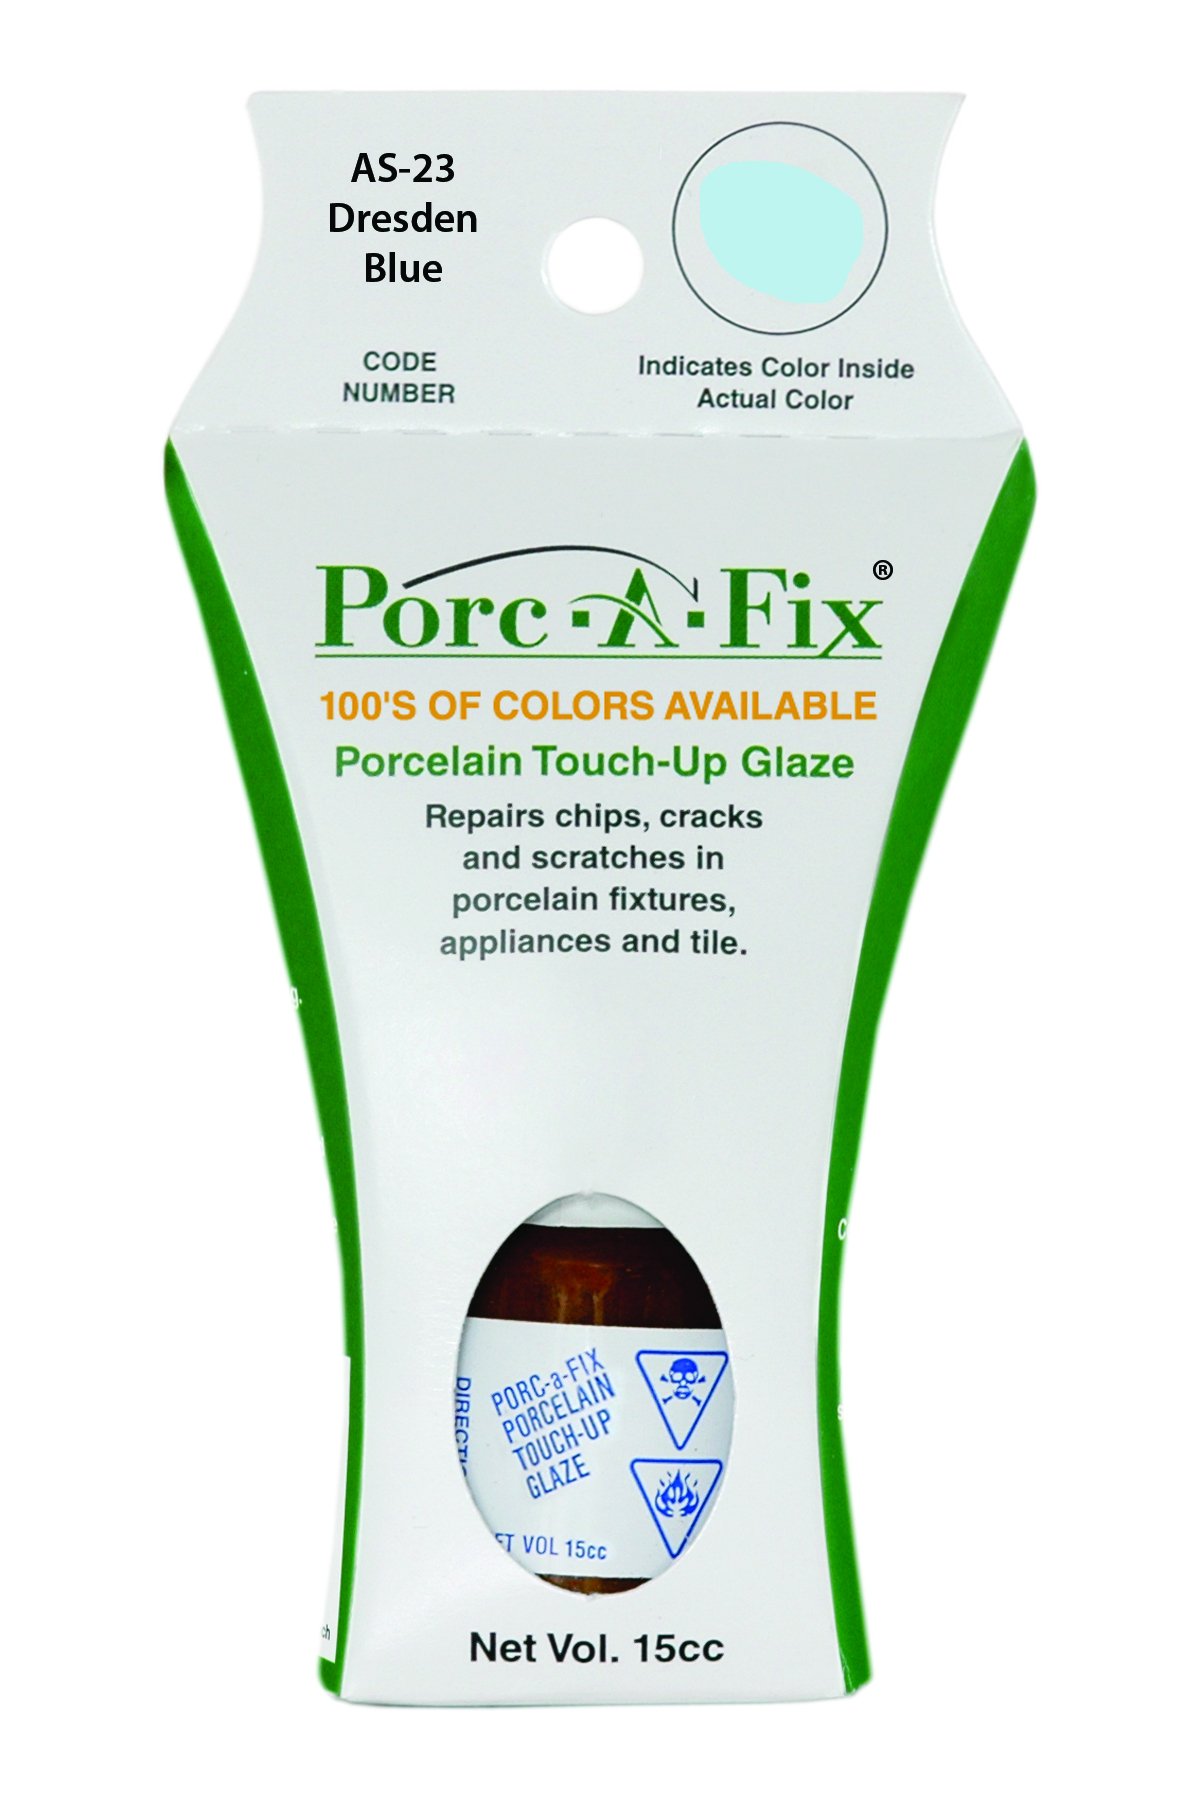 Fixture-Fix | AS-23 | Porc-A-Fix Touch-Up Glaze American Standard Dresden Blue - Compatible with American Standard 070900-1630A Touch Up Paint Kit - DRESDEN BLUE